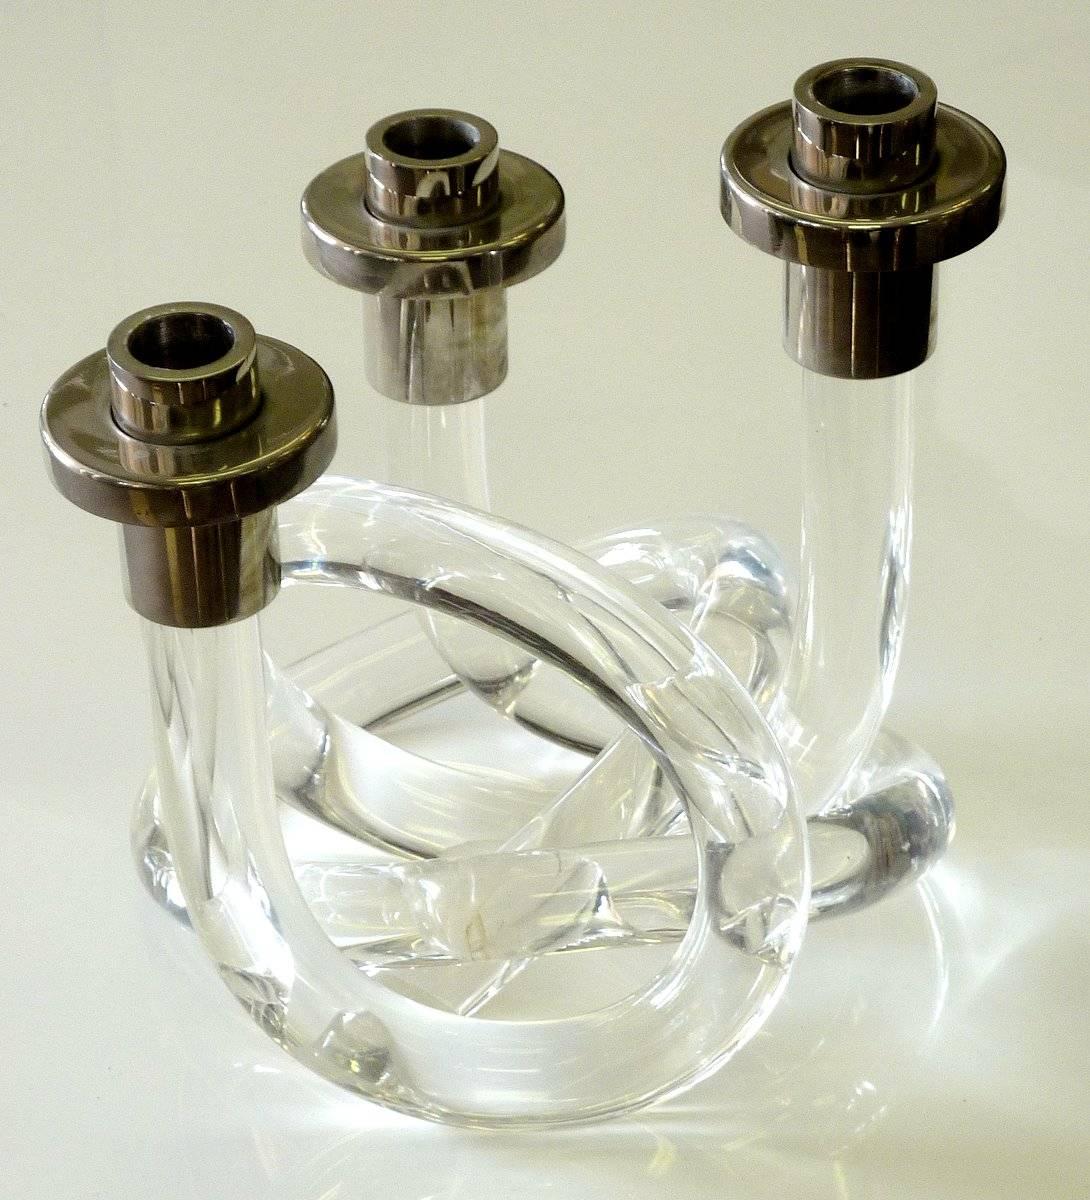 The most elegant candelabra by Dorothy Thorpe. Features interlocking elements of Lucite and nickel.

We have an extensive selection of vintage Lucite. If you are looking for a special piece or a specific designer, just ask.

A few important notes